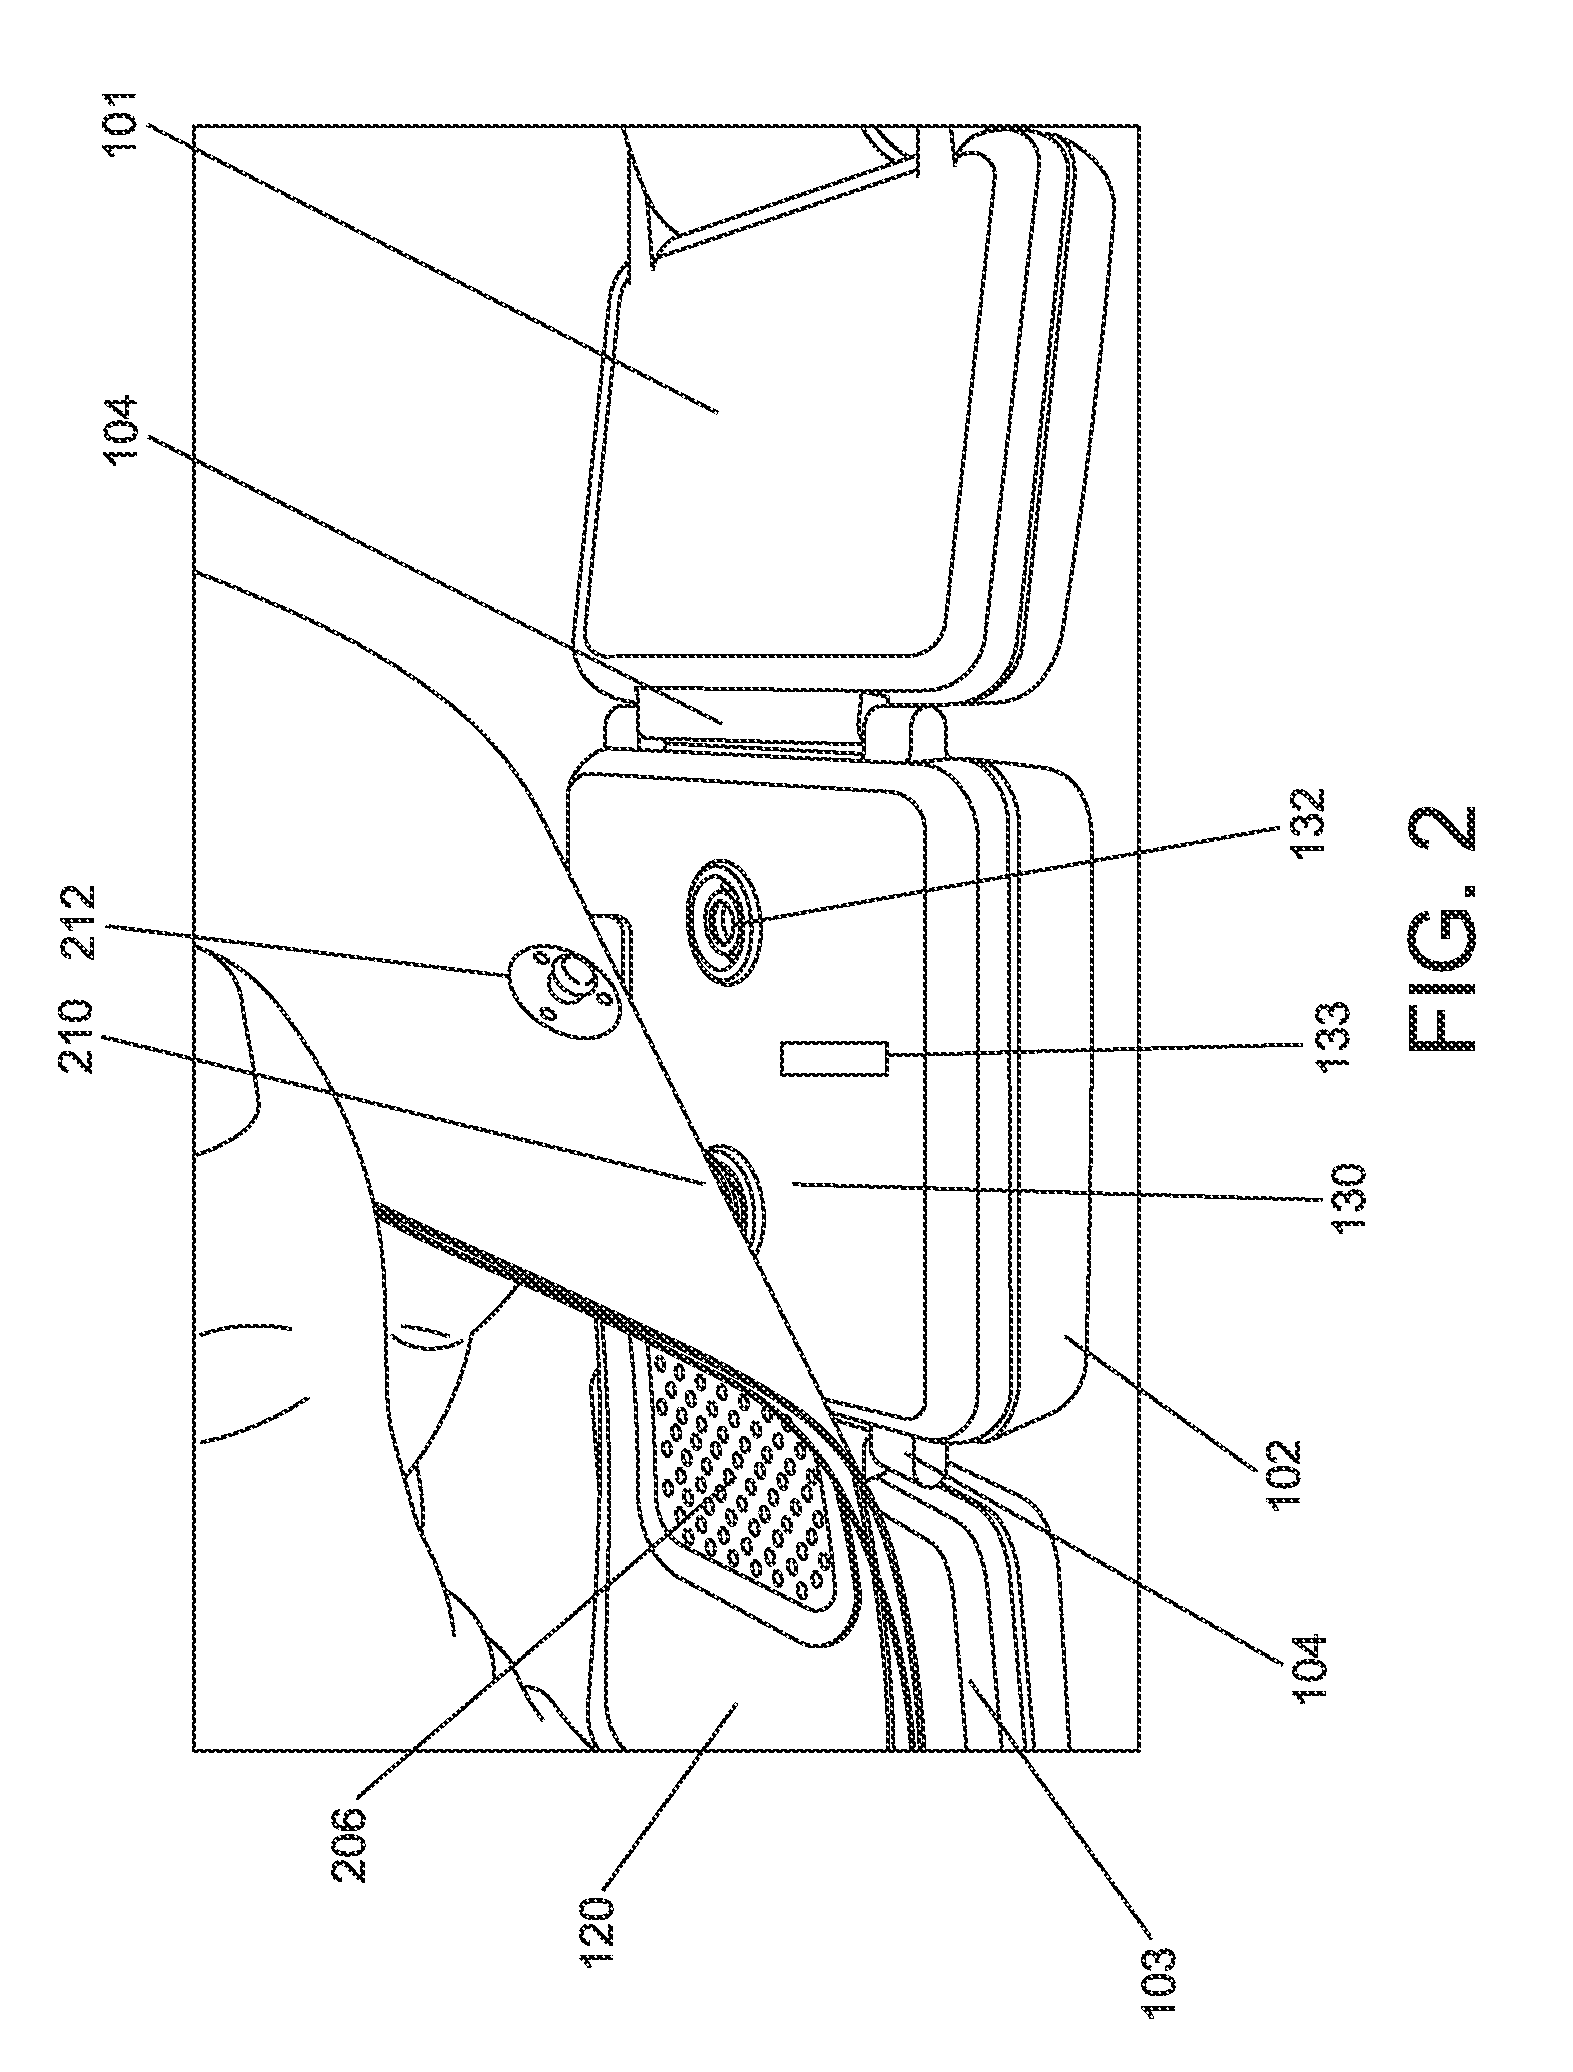 Apparatus and method for relieving pain using transcutaneous electrical nerve stimulation